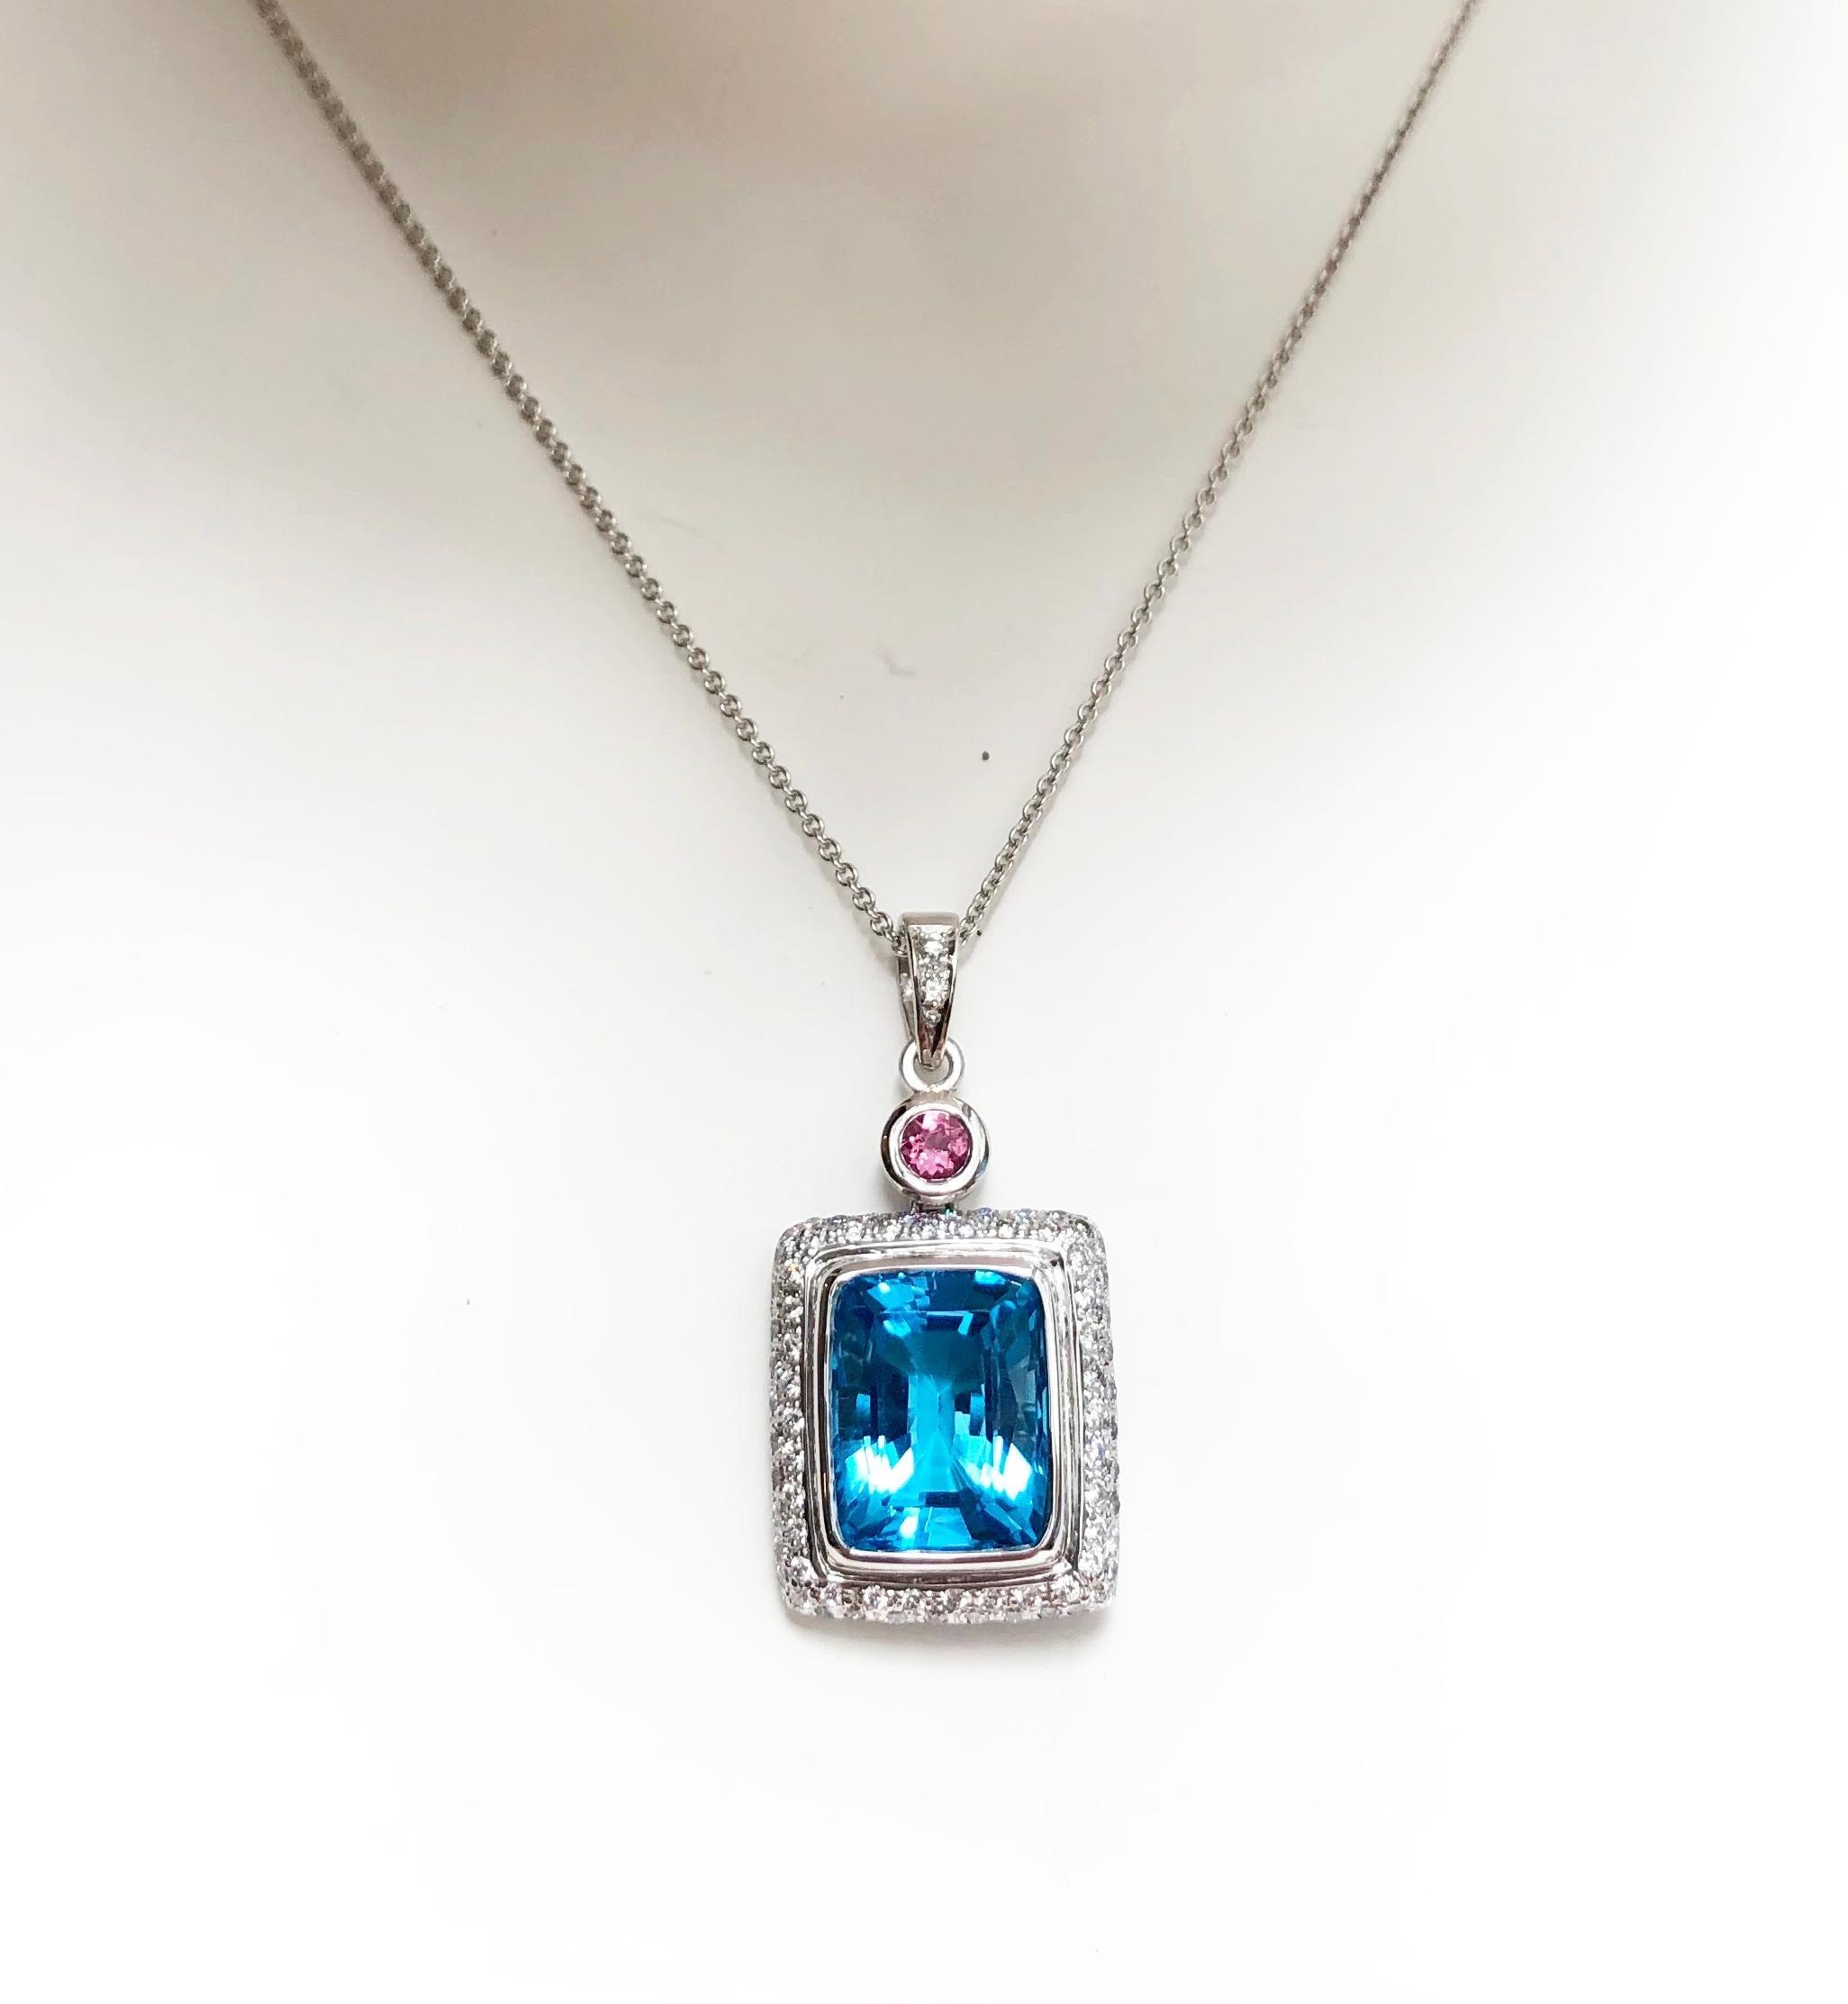 Blue Topaz 14.57 carats with Pink Tourmaline 0.15 carat and Diamond 0.60 carat Pendant set in 18 Karat White Gold Settings
(chain not included)

Width:  1.7 cm 
Length: 3.6 cm
Total Weight: 7.95 grams

